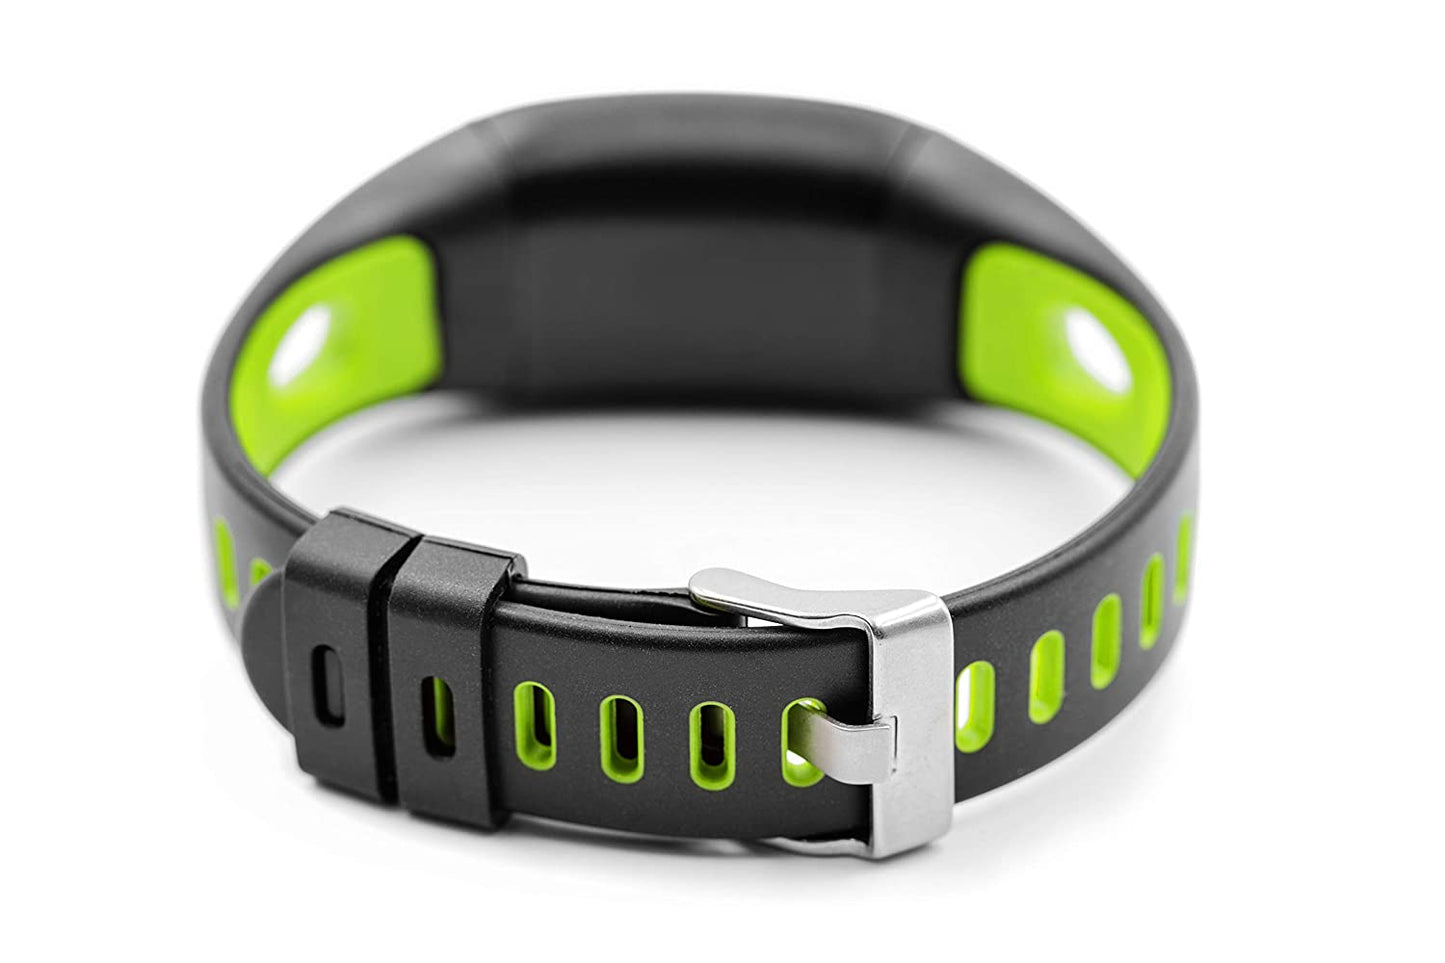 Pokemon Go GO-TCHA Evolve LED-Touch Wristband Accessory (Green and black) - Auto Catch and Auto